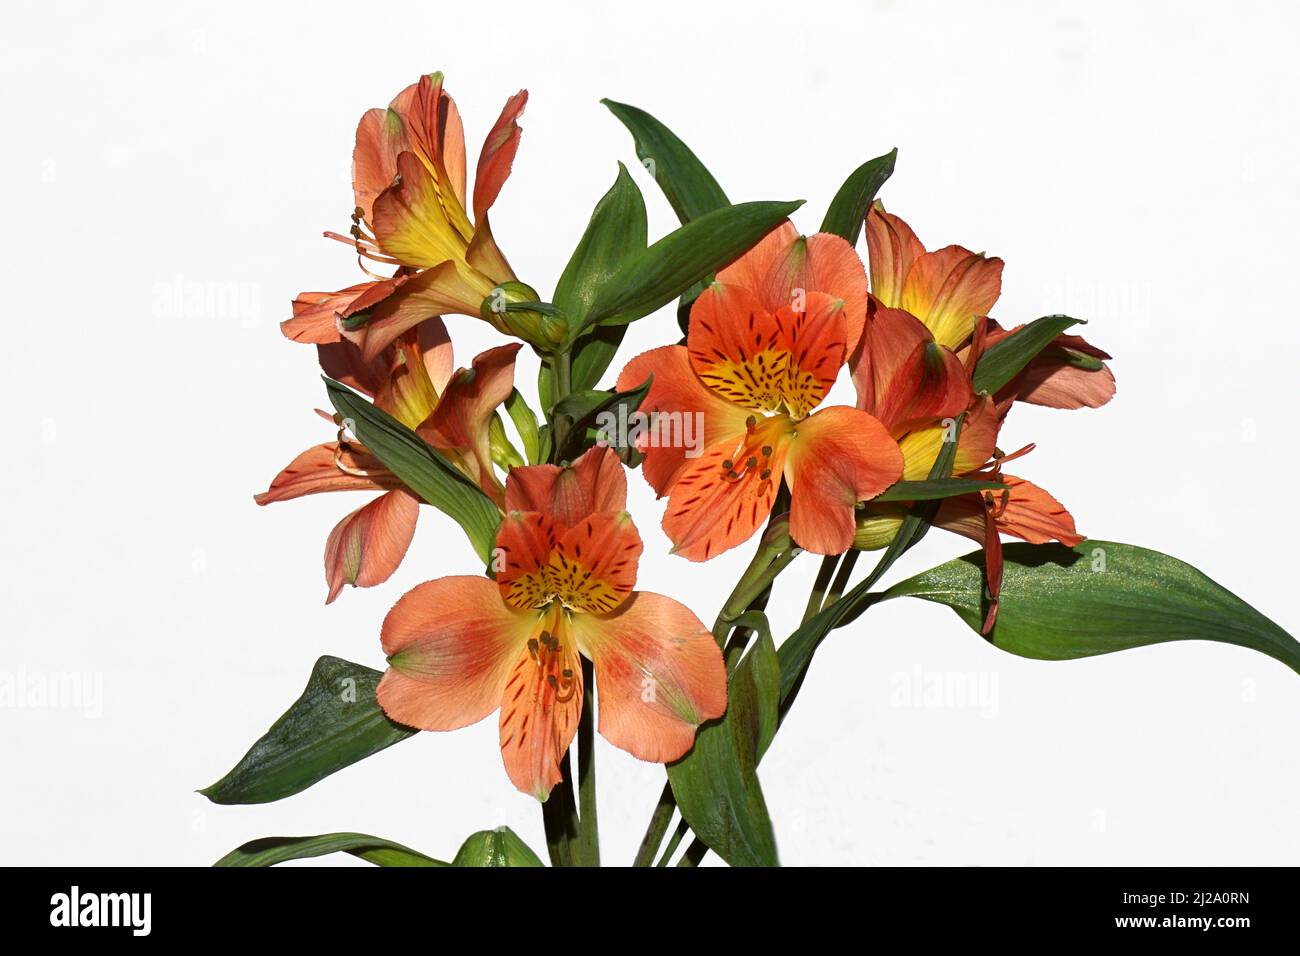 Close up of orange yellow flowers of Peruvian lily, lily of the Incas (Alstroemeria). Isolated on a white background. Netherlands. Stock Photo